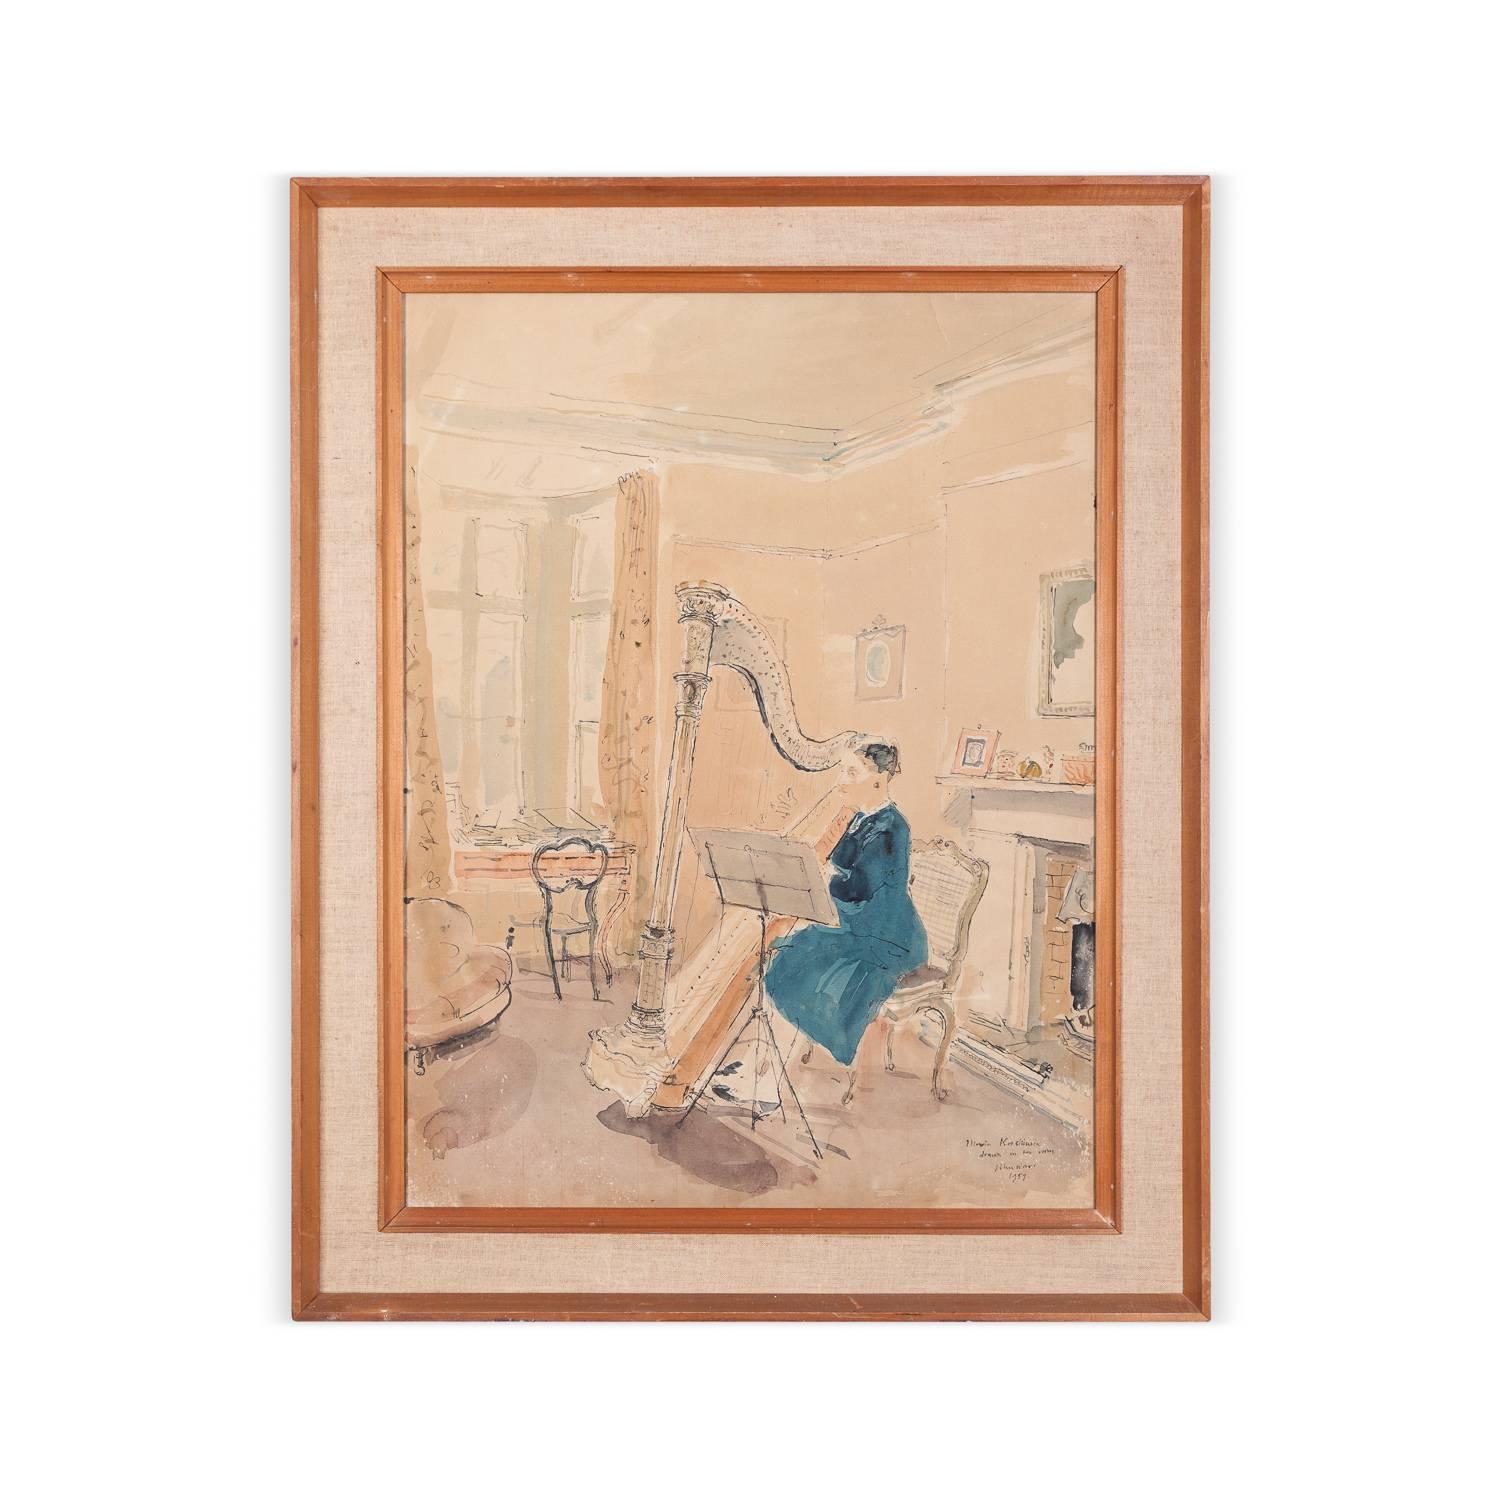 Pen, ink and watercolour of Maria Korchinska drawn in her room by John Stanton Ward signed and dated 1959.

The picture measures 62.5cm by 47cm. The frame measures 77.5cm by 62cm.



John Stanton Ward CBE (10th October 1917 - 13th June 2007) 

Ward